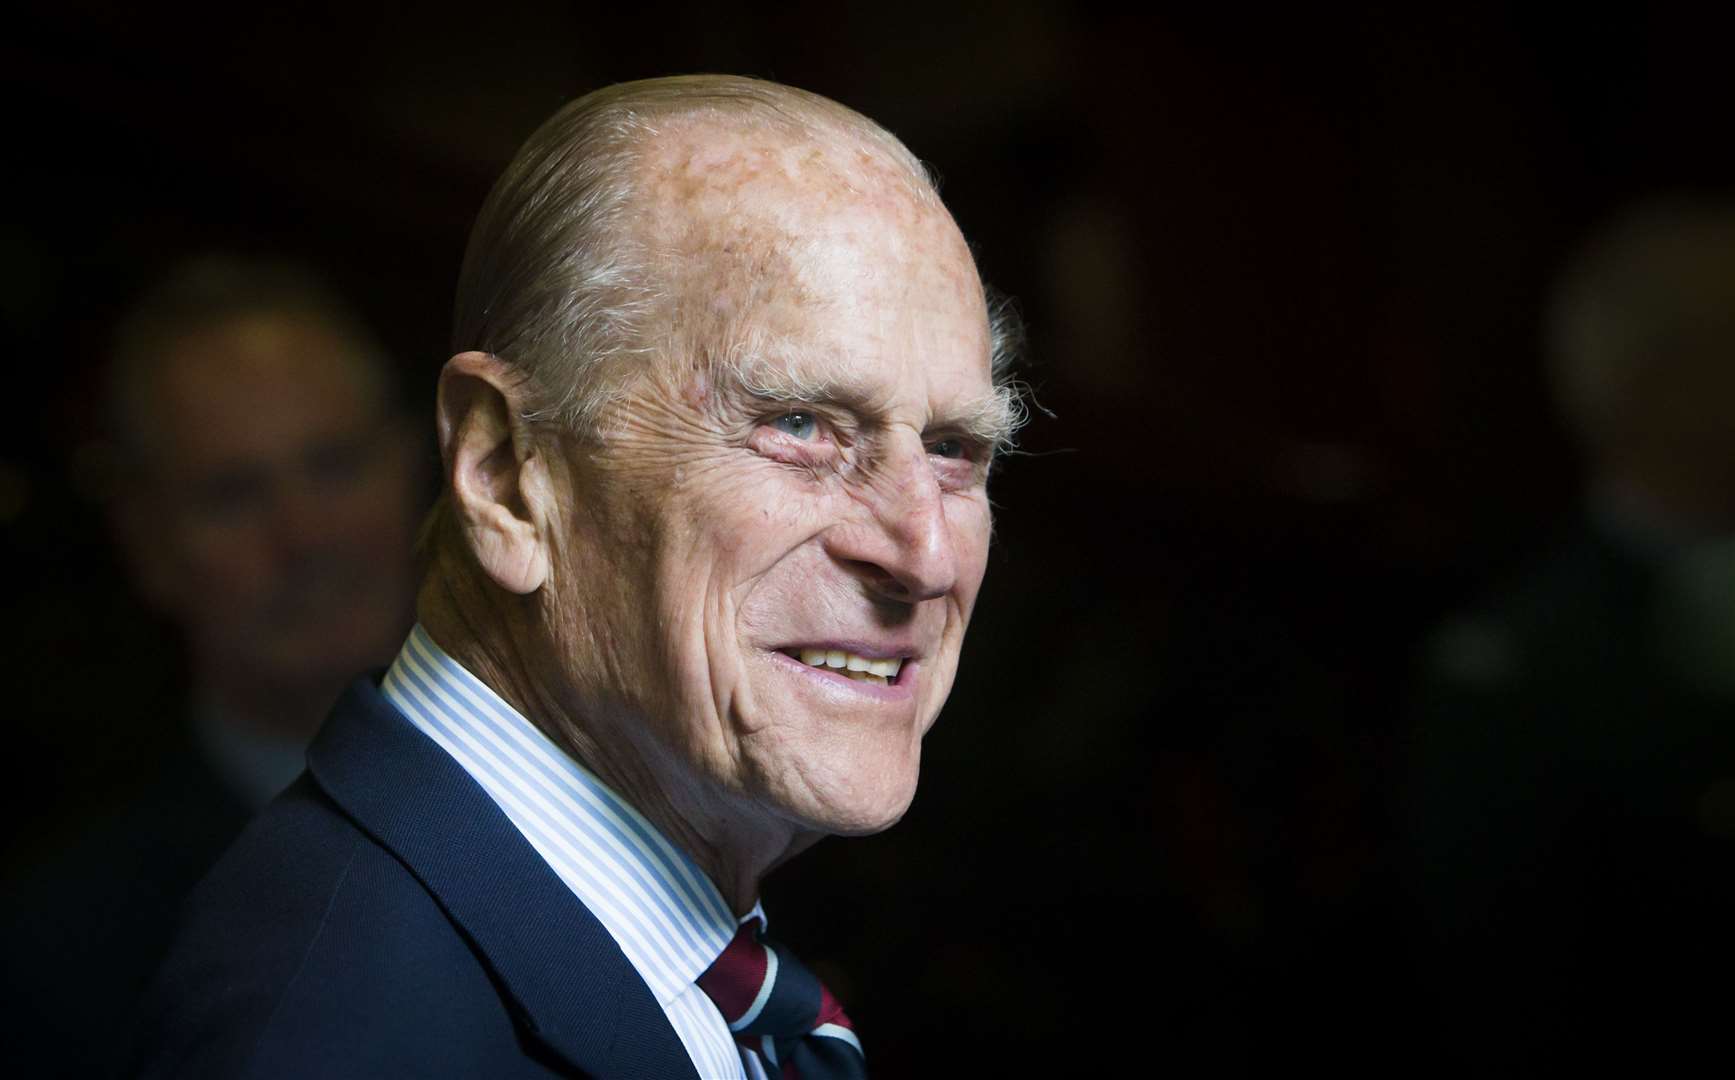 Prince Philip will be laid to rest on Saturday